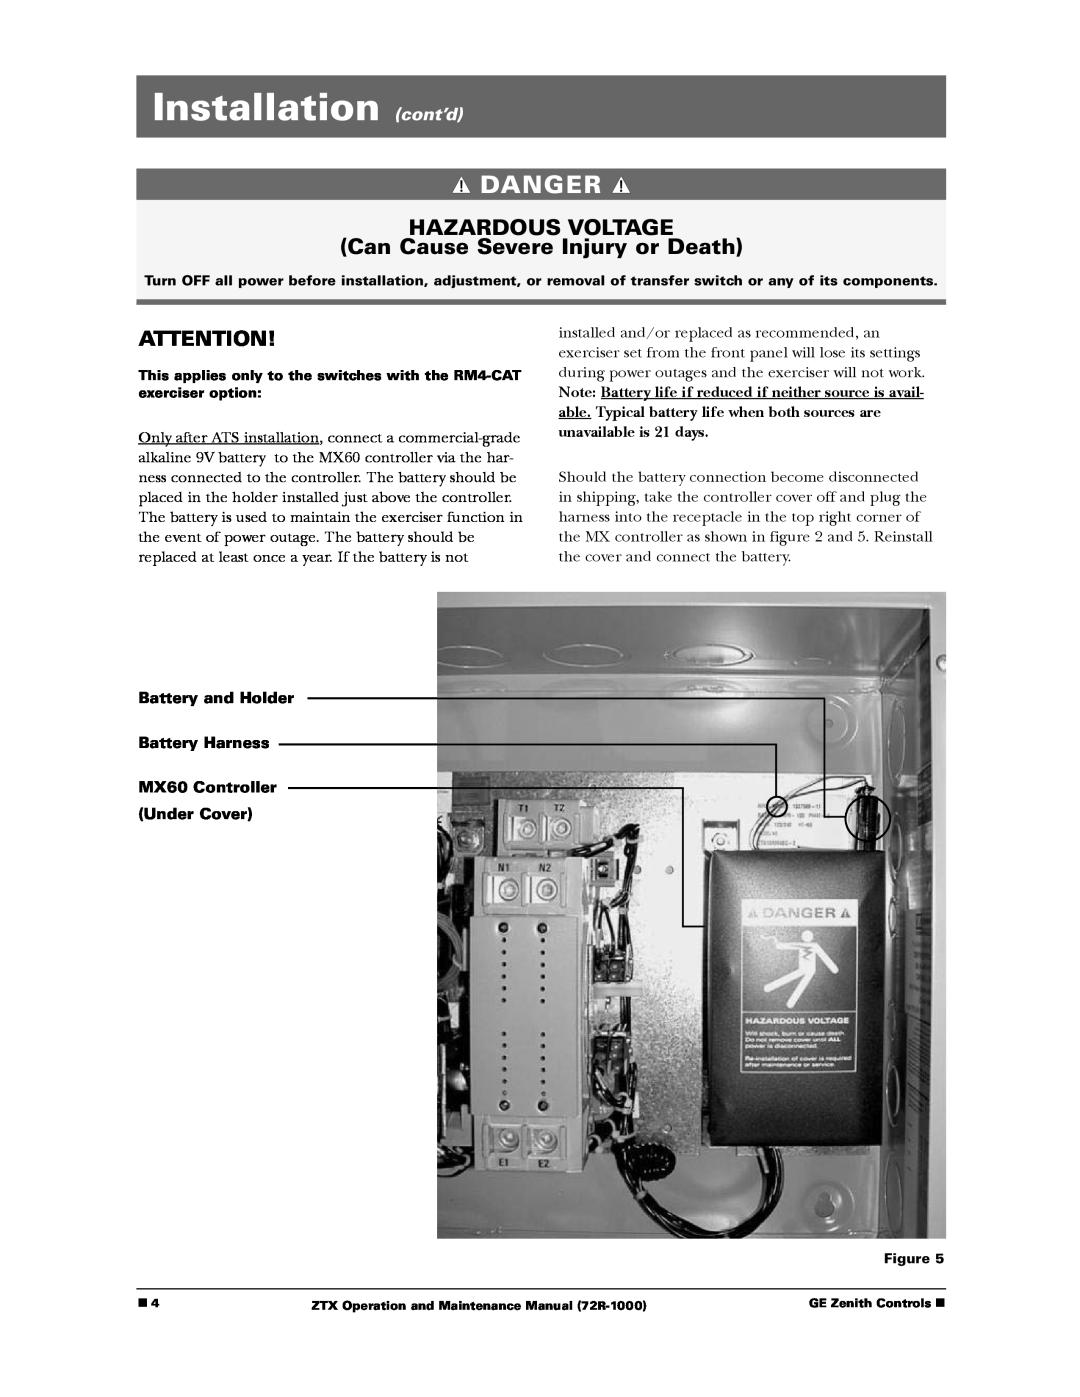 GE ZTX manual Installation cont’d, Danger, Hazardous Voltage, Can Cause Severe Injury or Death, MX60 Controller Under Cover 